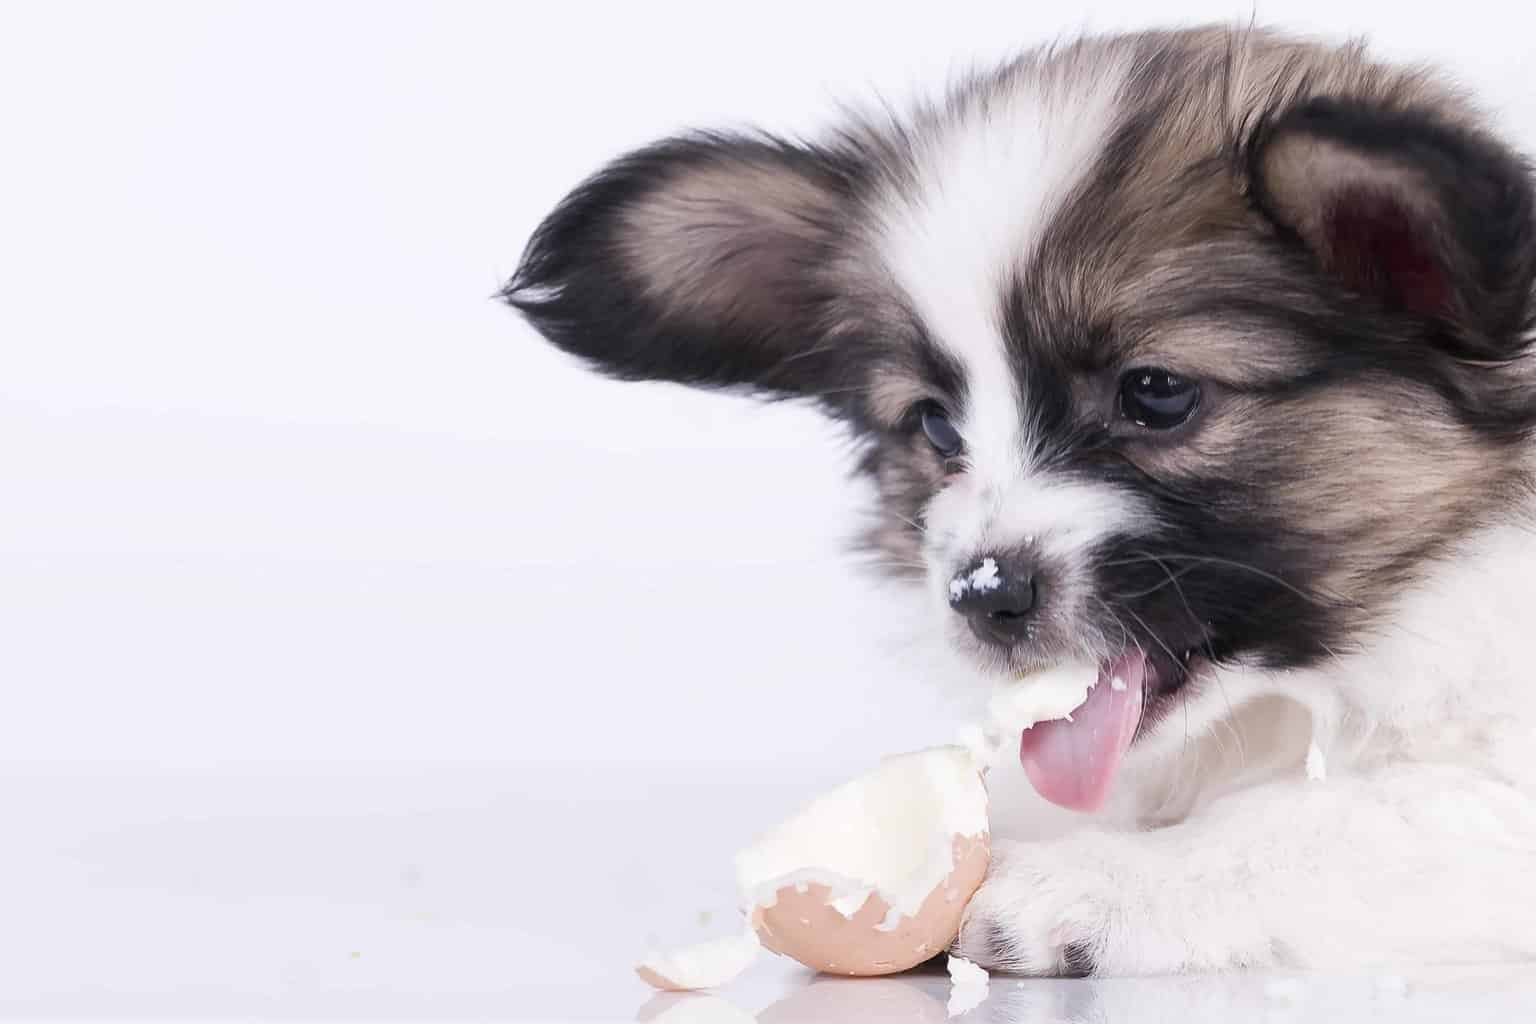 Australian shepherd puppy eats eggshell. Eggshells are rich in nutrients that can be very beneficial for your dog. They help with development, immune function, metabolism, and growth. Consider grinding the eggshells into powder before adding them to your dog's food.  